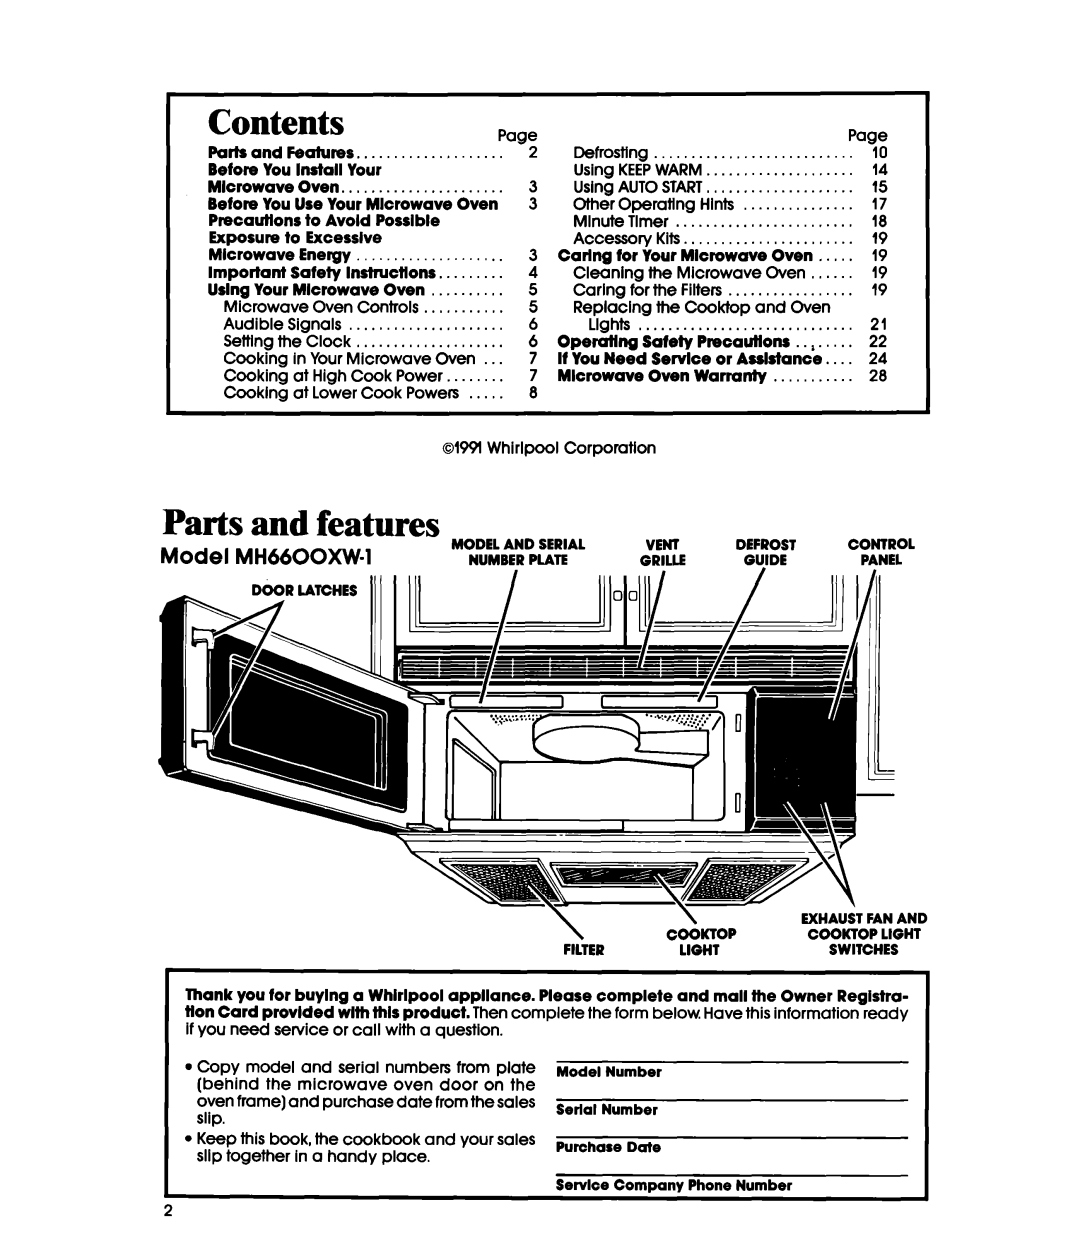 Whirlpool MH66OOXXO, MH6600XWl manual Contents, Parts and features, Model MH6600XW-1, II/IIII I lll”lolll// IIIIAl 